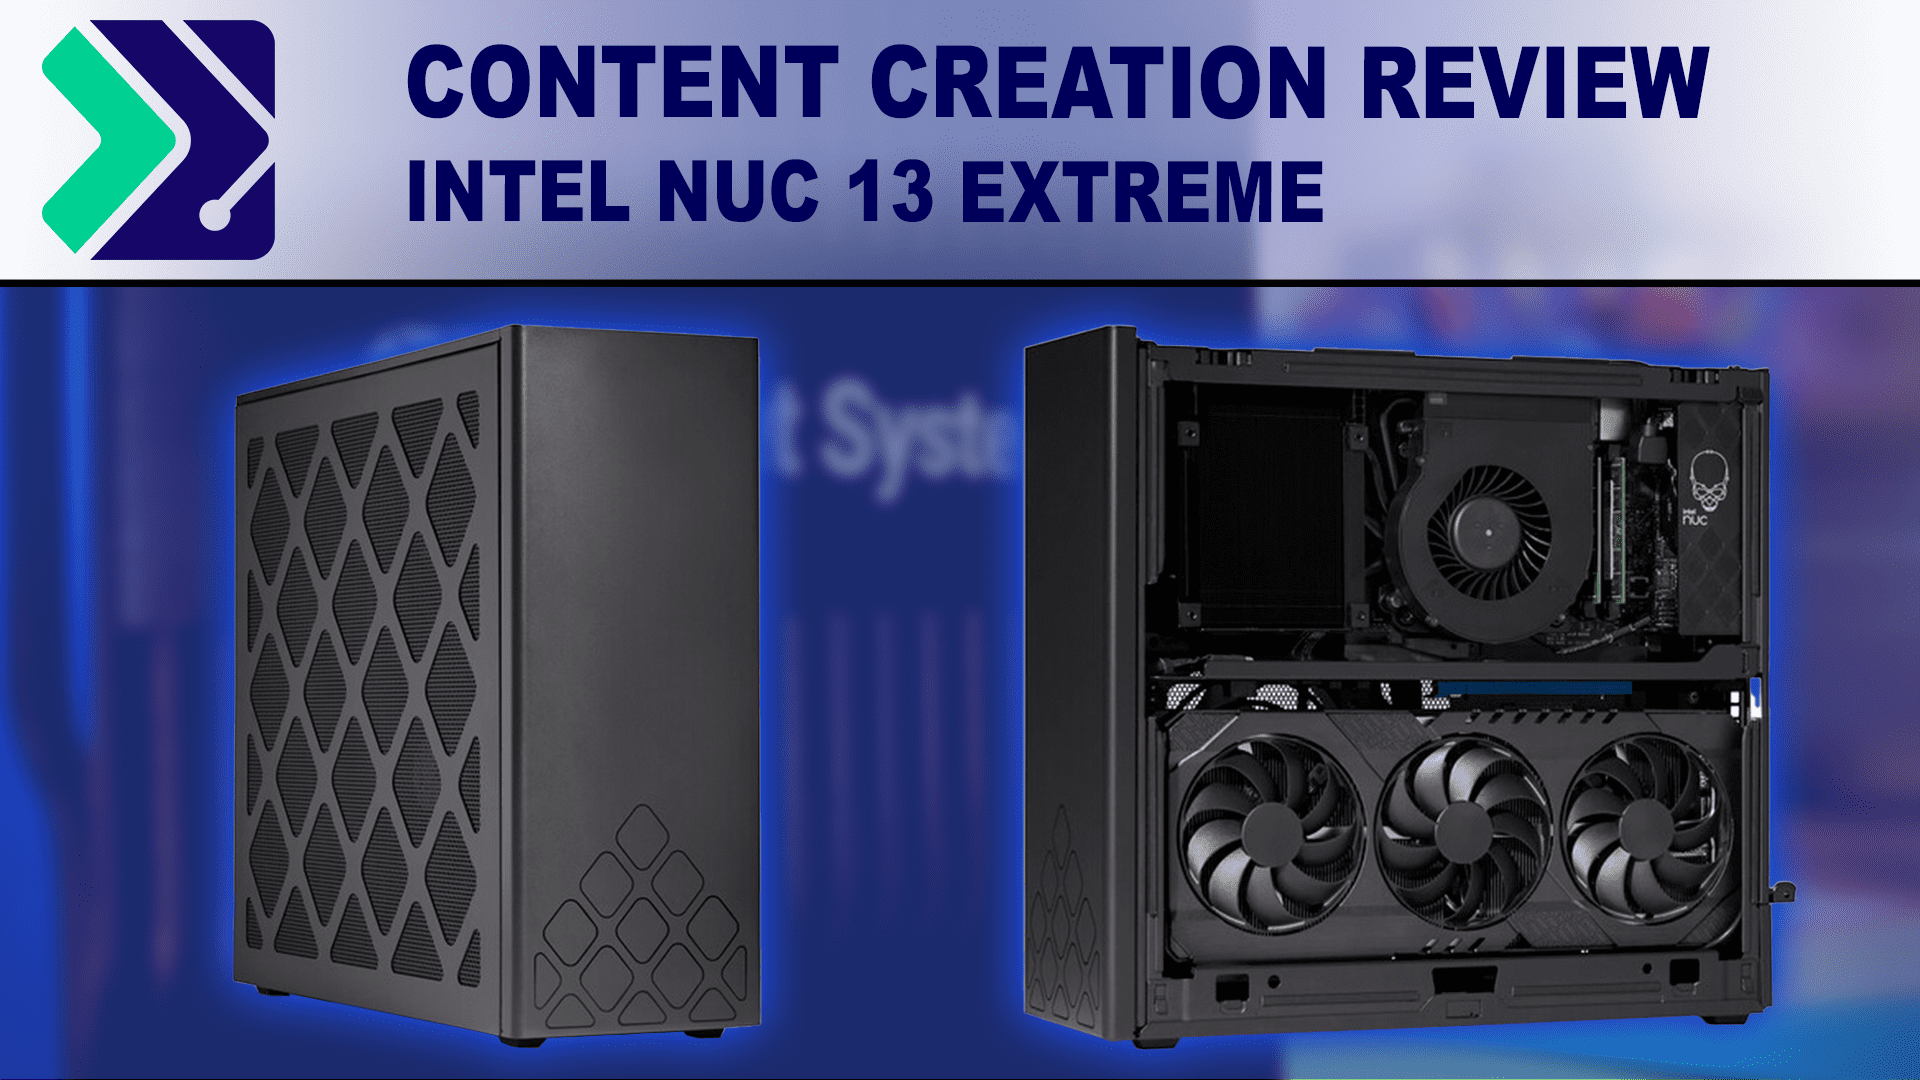 Intel NUC 13 Extreme Sets New Standard for Gaming Performance